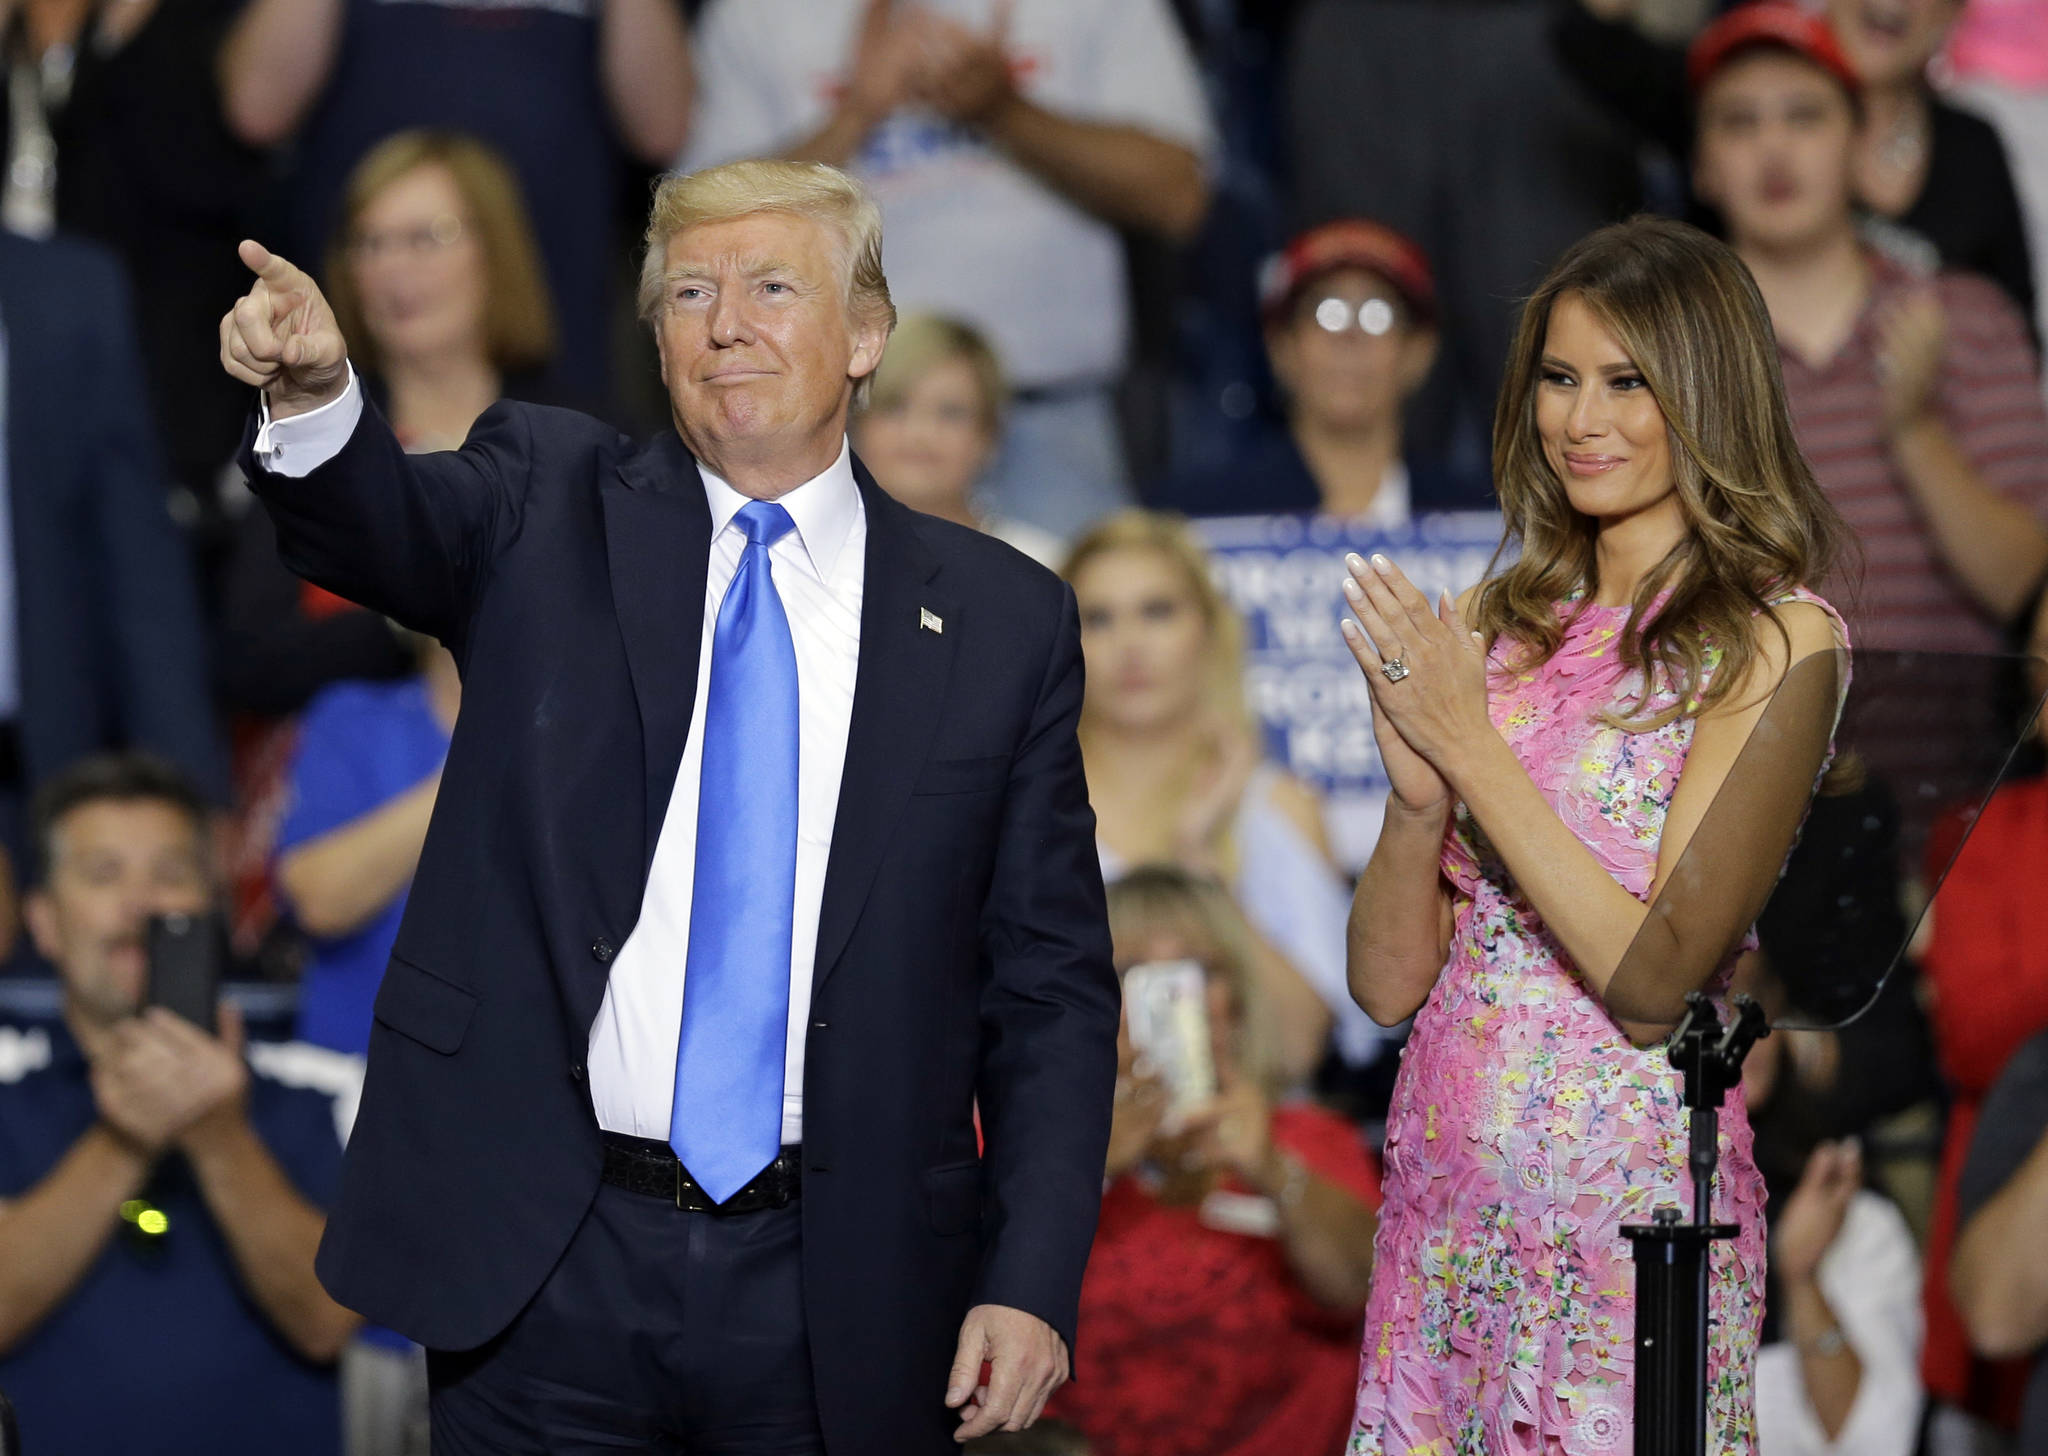 President Donald Trump points to his supporters as first lady Melania Trump watches after speaking at the Covelli Centre, Tuesday, July 25, 2017, in Youngstown, Ohio. (Tony Dejak | The Associated Press)